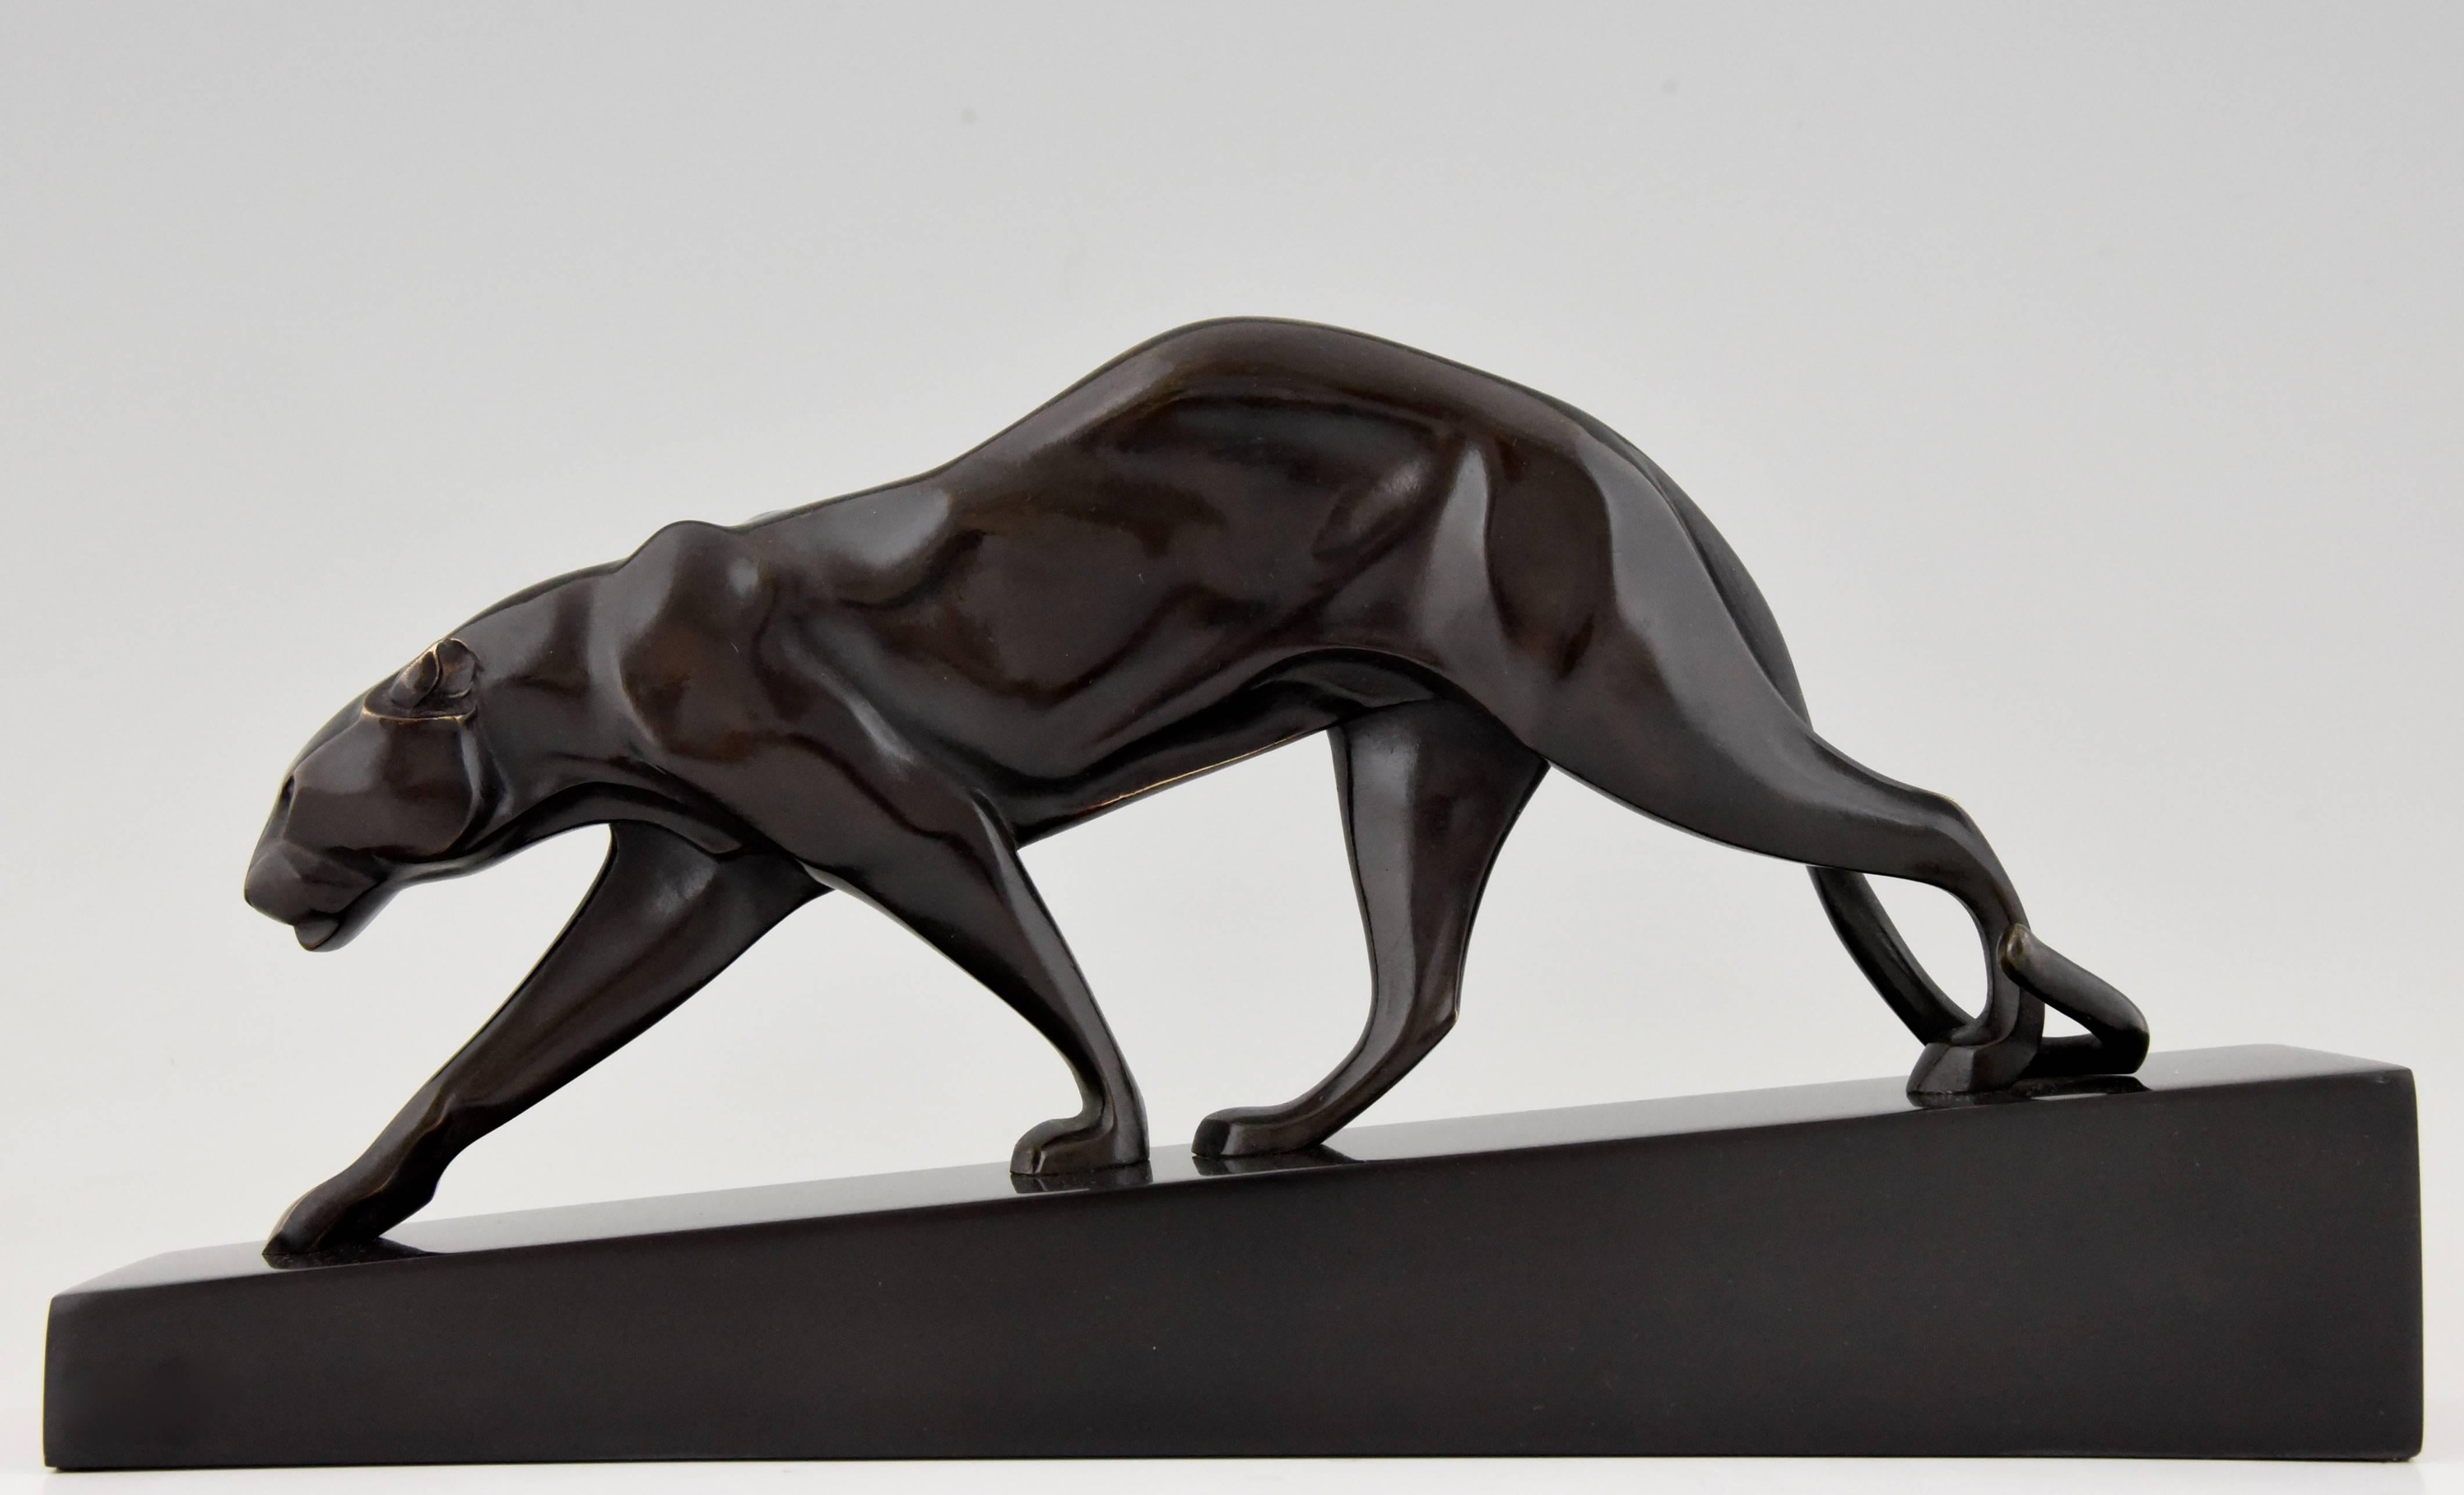 Stylish Art Deco bronze sculpture of a walking panther by Maurice Prost. Signed on the black marble base and with founders' signature.
Original and authentic sculpture of the Art Deco period. 

Artist/Maker:
Maurice Prost.
Signature/Marks:
M.